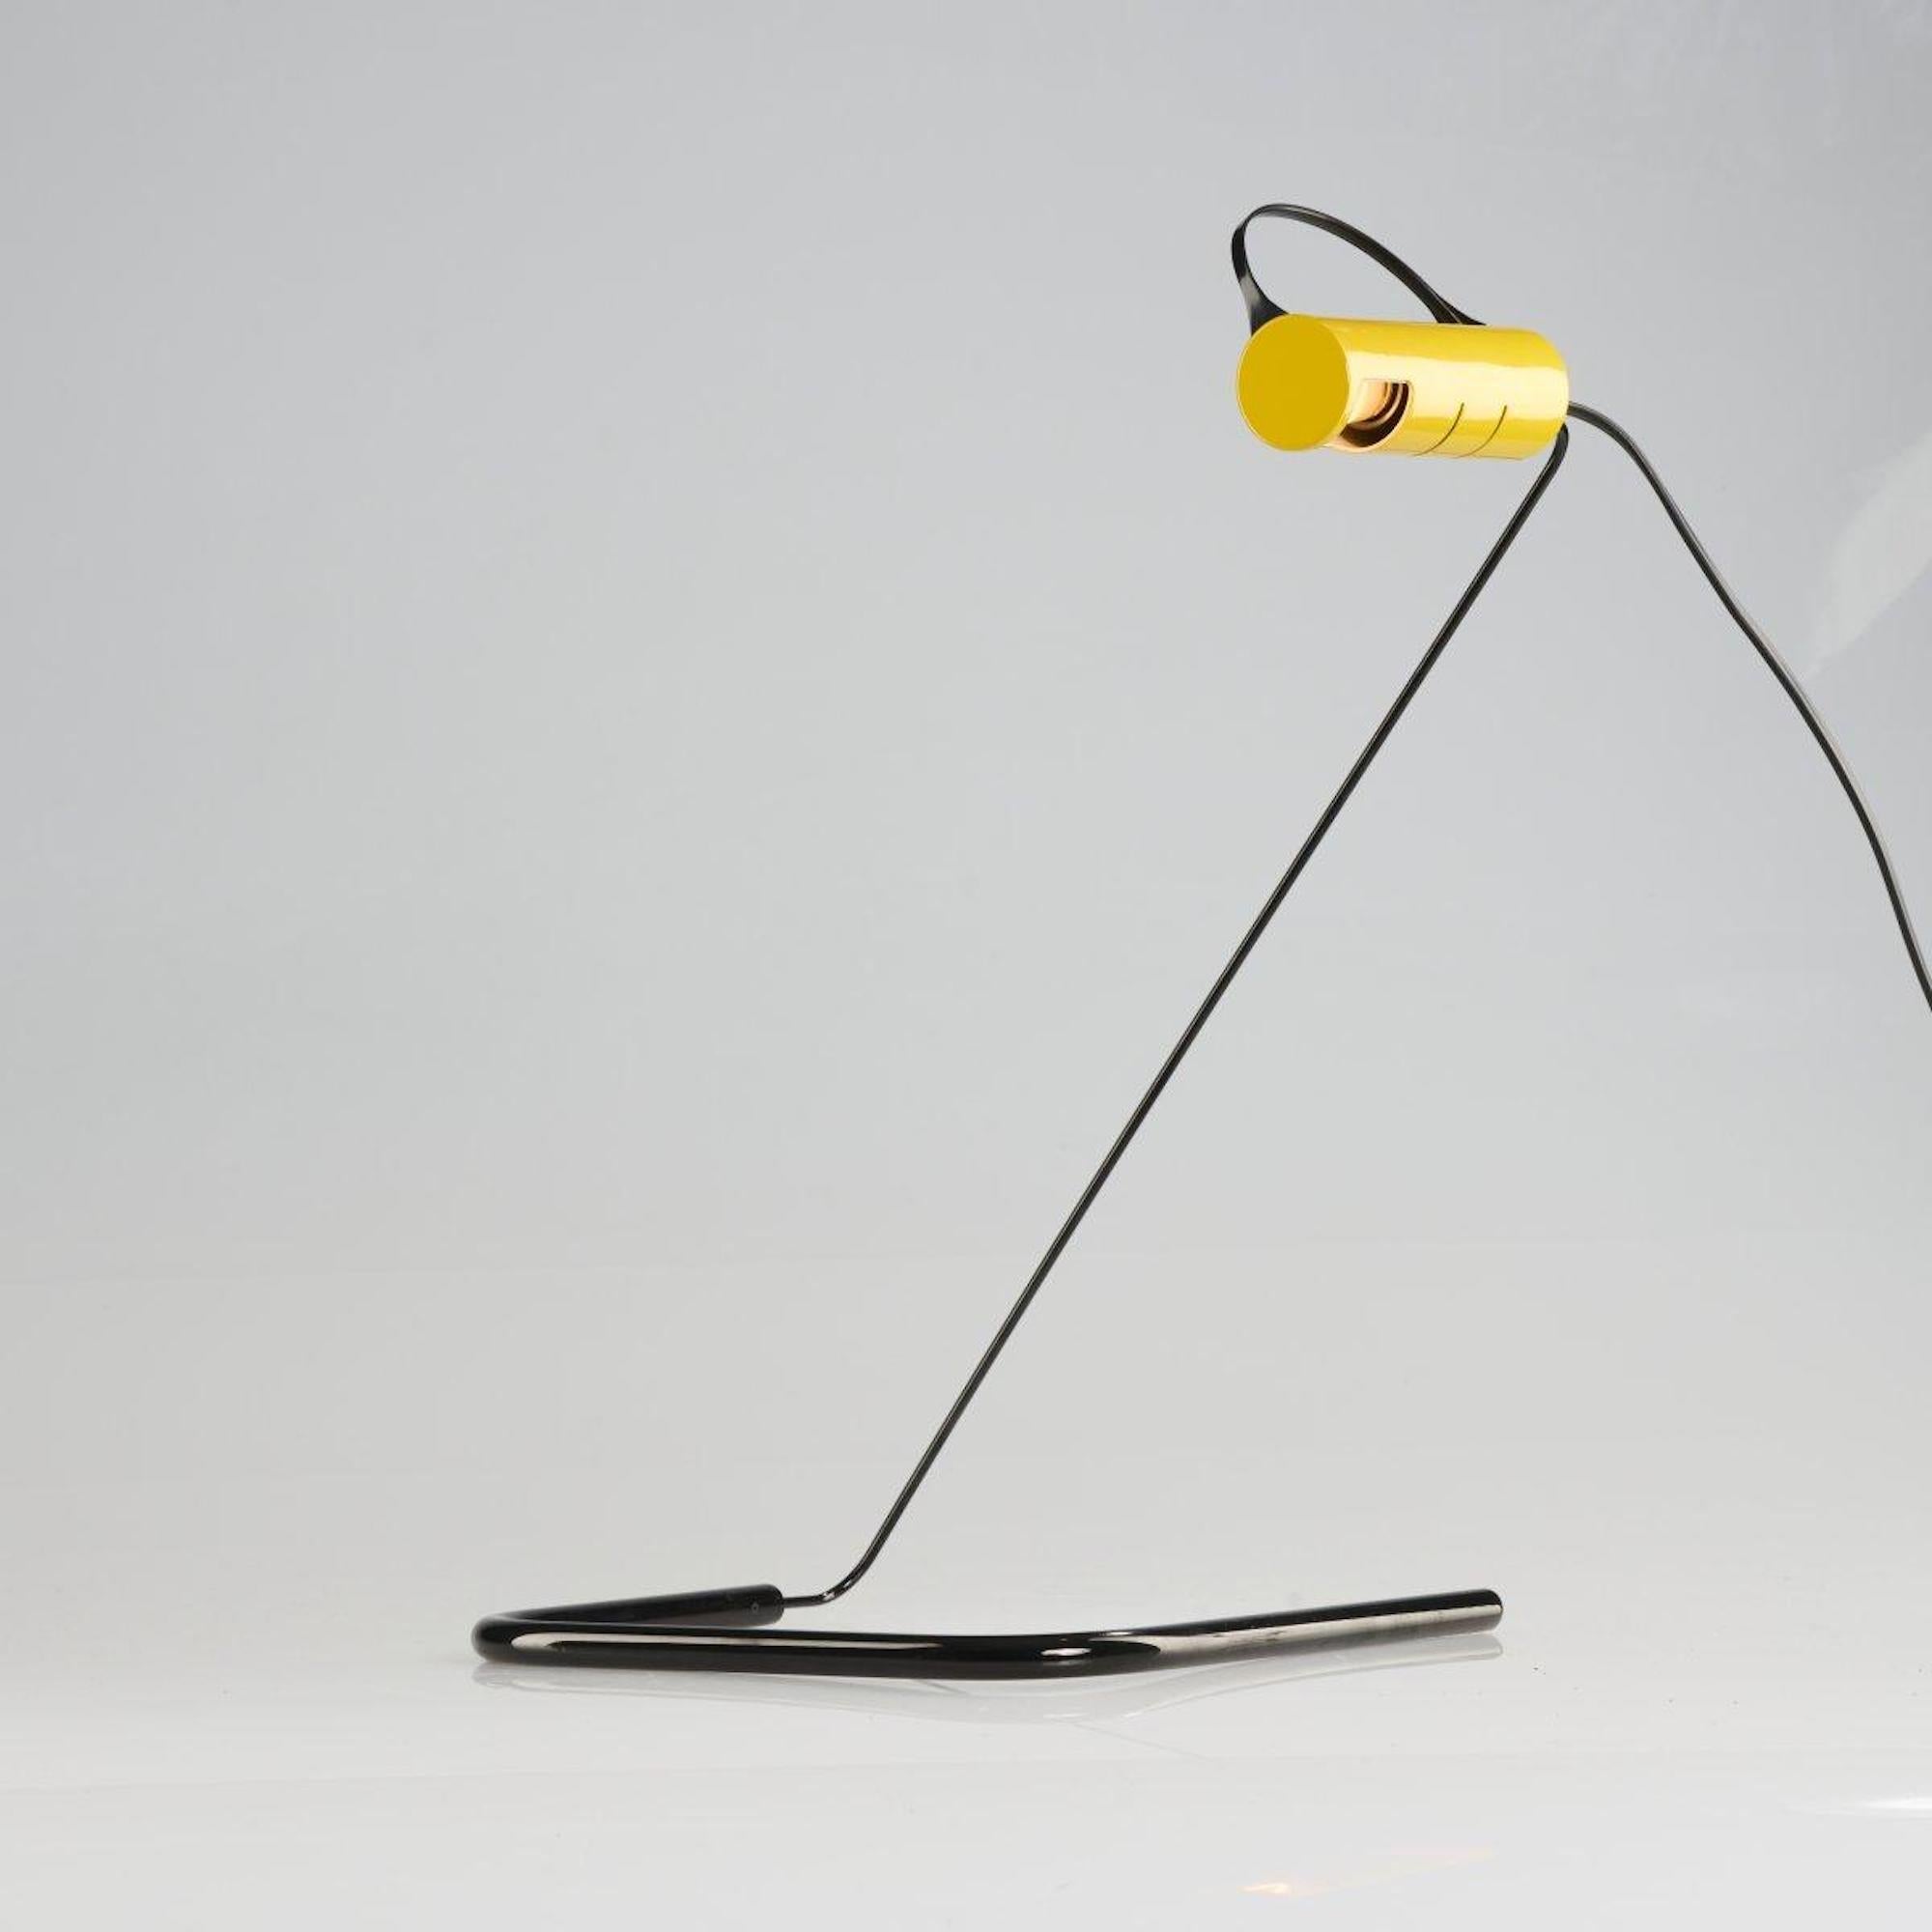 Metal Slalom Table Lamp by Vico Magistretti for Oluce, 1981 For Sale